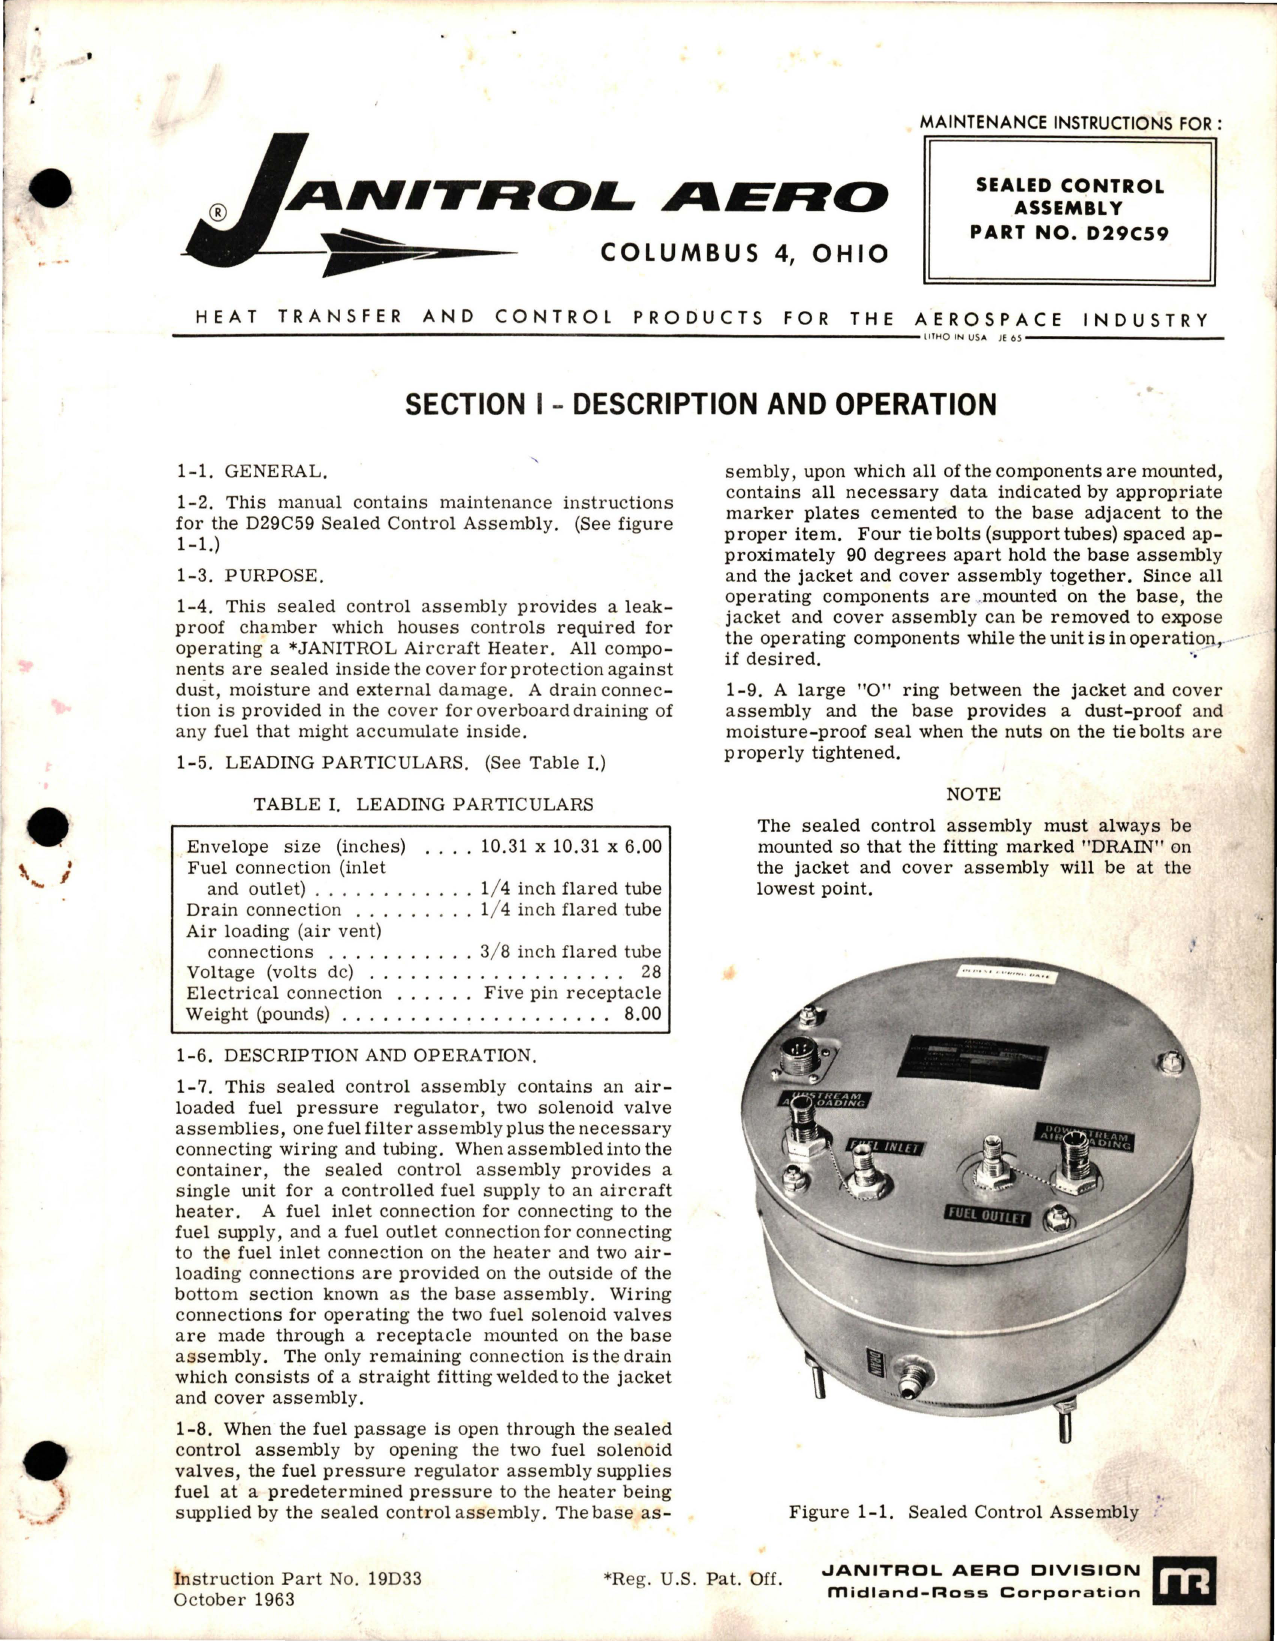 Sample page 1 from AirCorps Library document: Maintenance Instructions for Sealed Control Assembly - Part D29C59